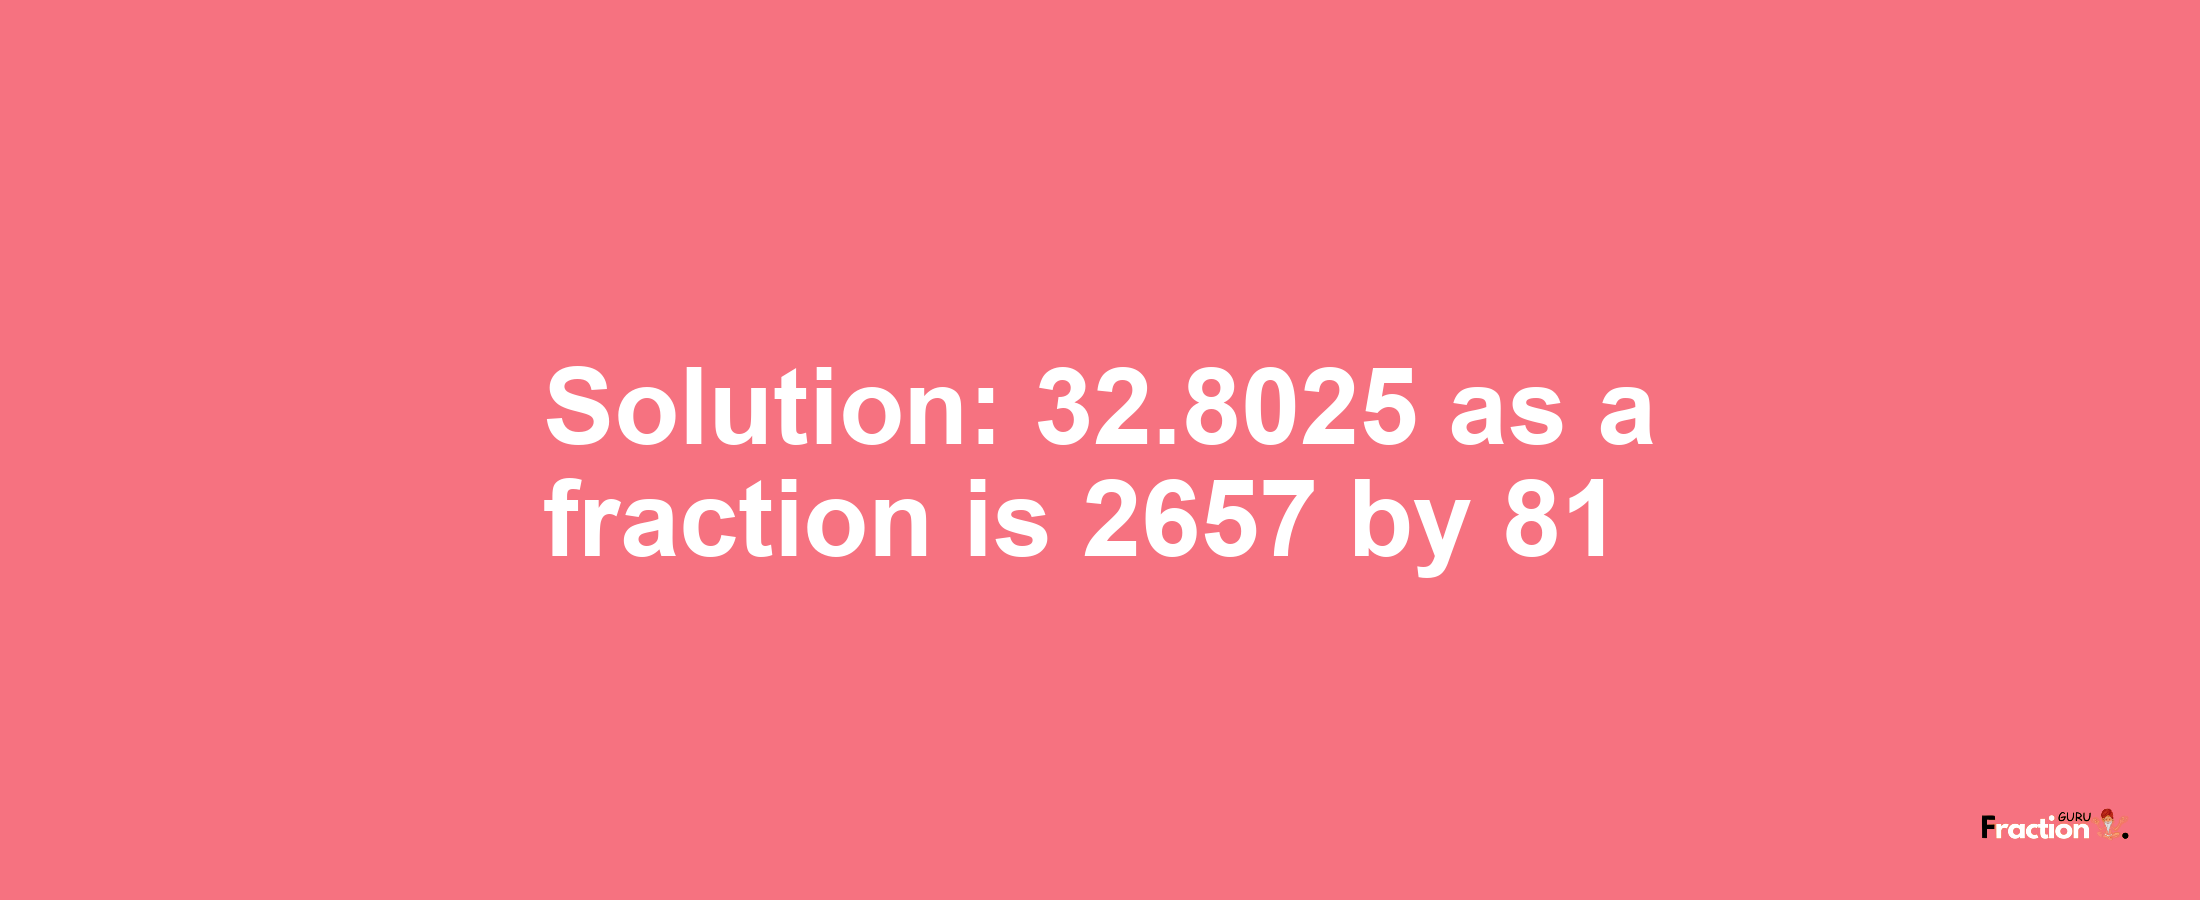 Solution:32.8025 as a fraction is 2657/81